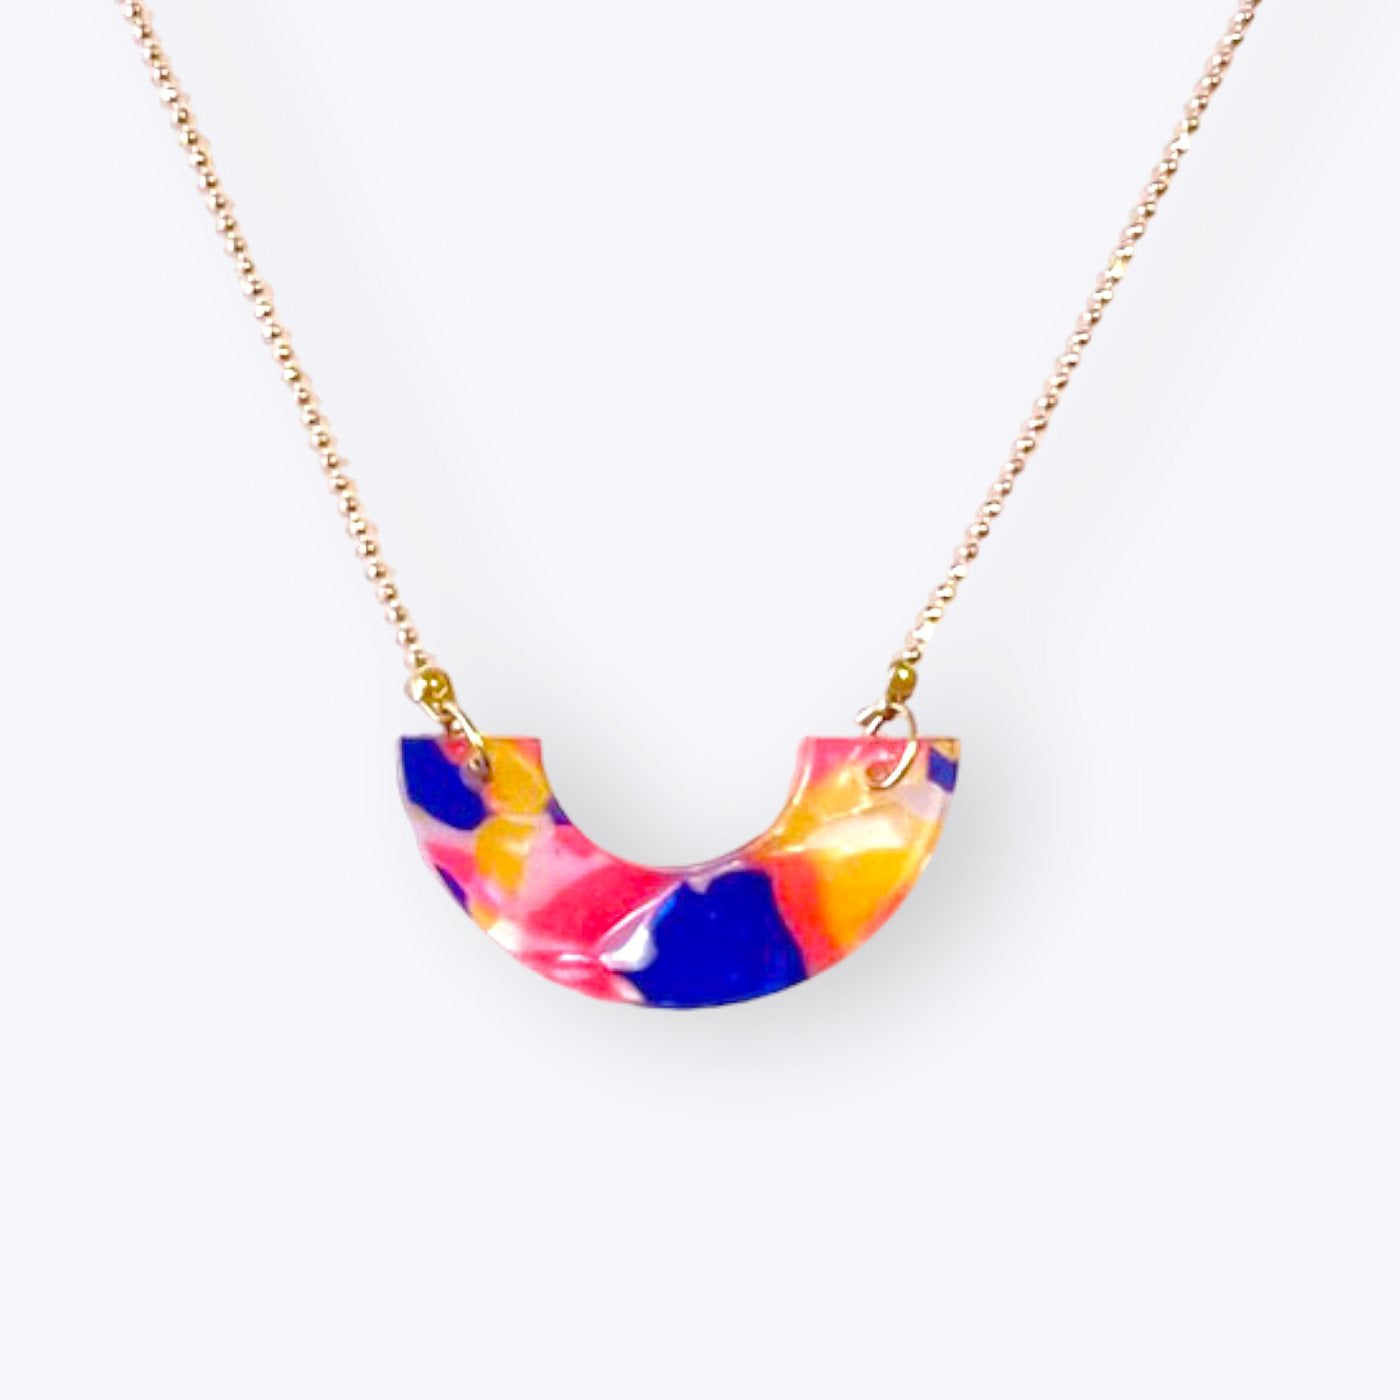 All Things We Like - Bow necklace Pinkmix